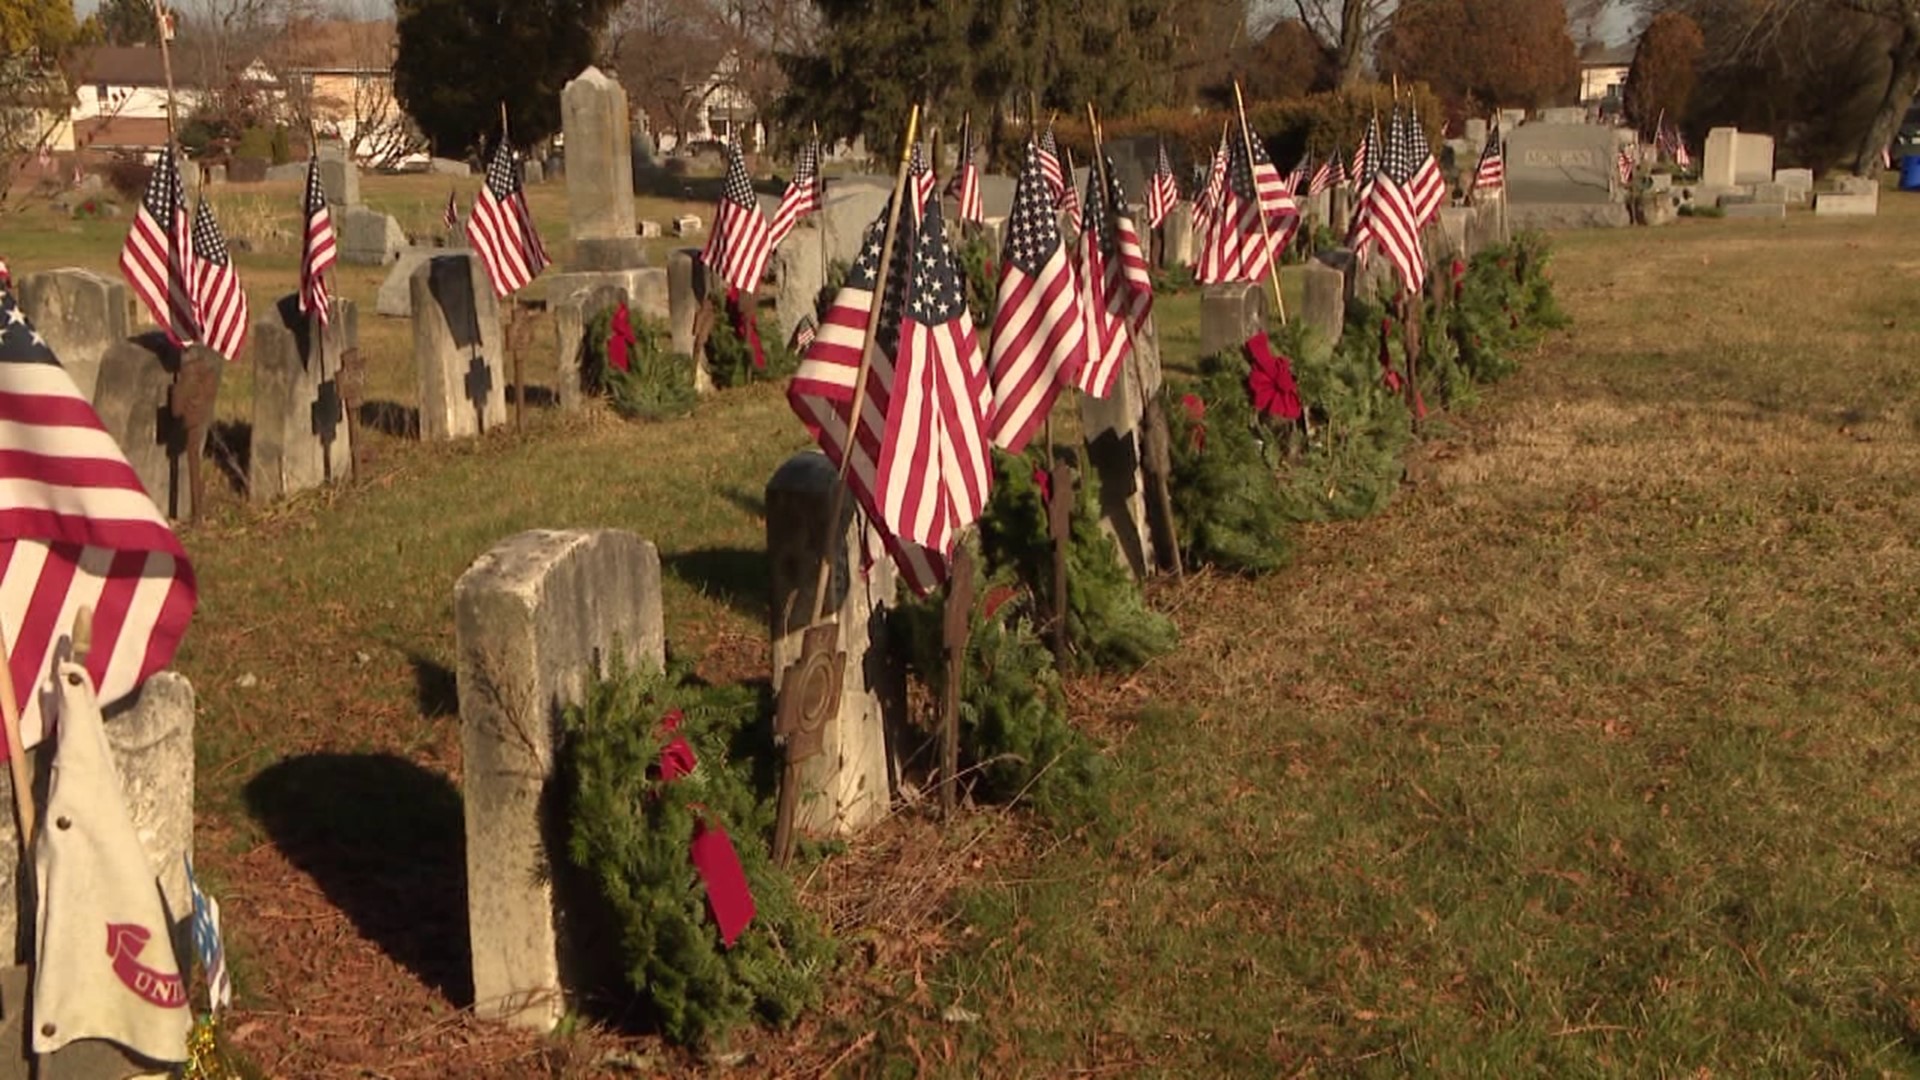 This was the last year for the event at one cemetery in Luzerne County.